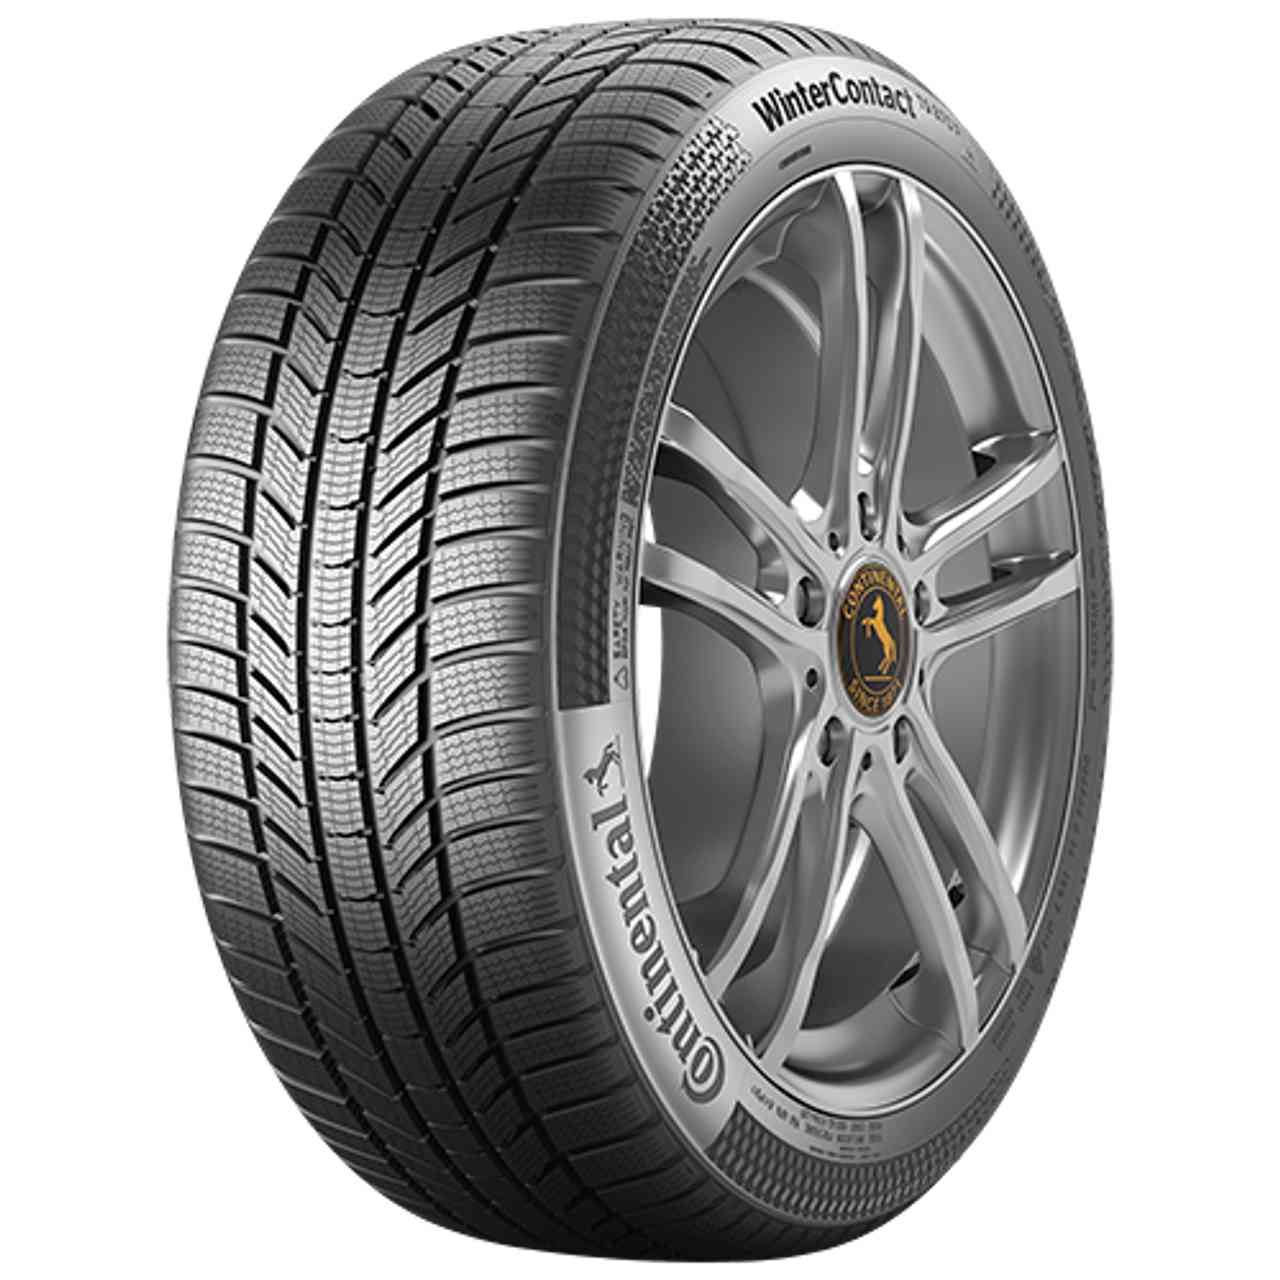 CONTINENTAL WINTERCONTACT TS 870 P (EVc) 215/50R18 92V FR BSW